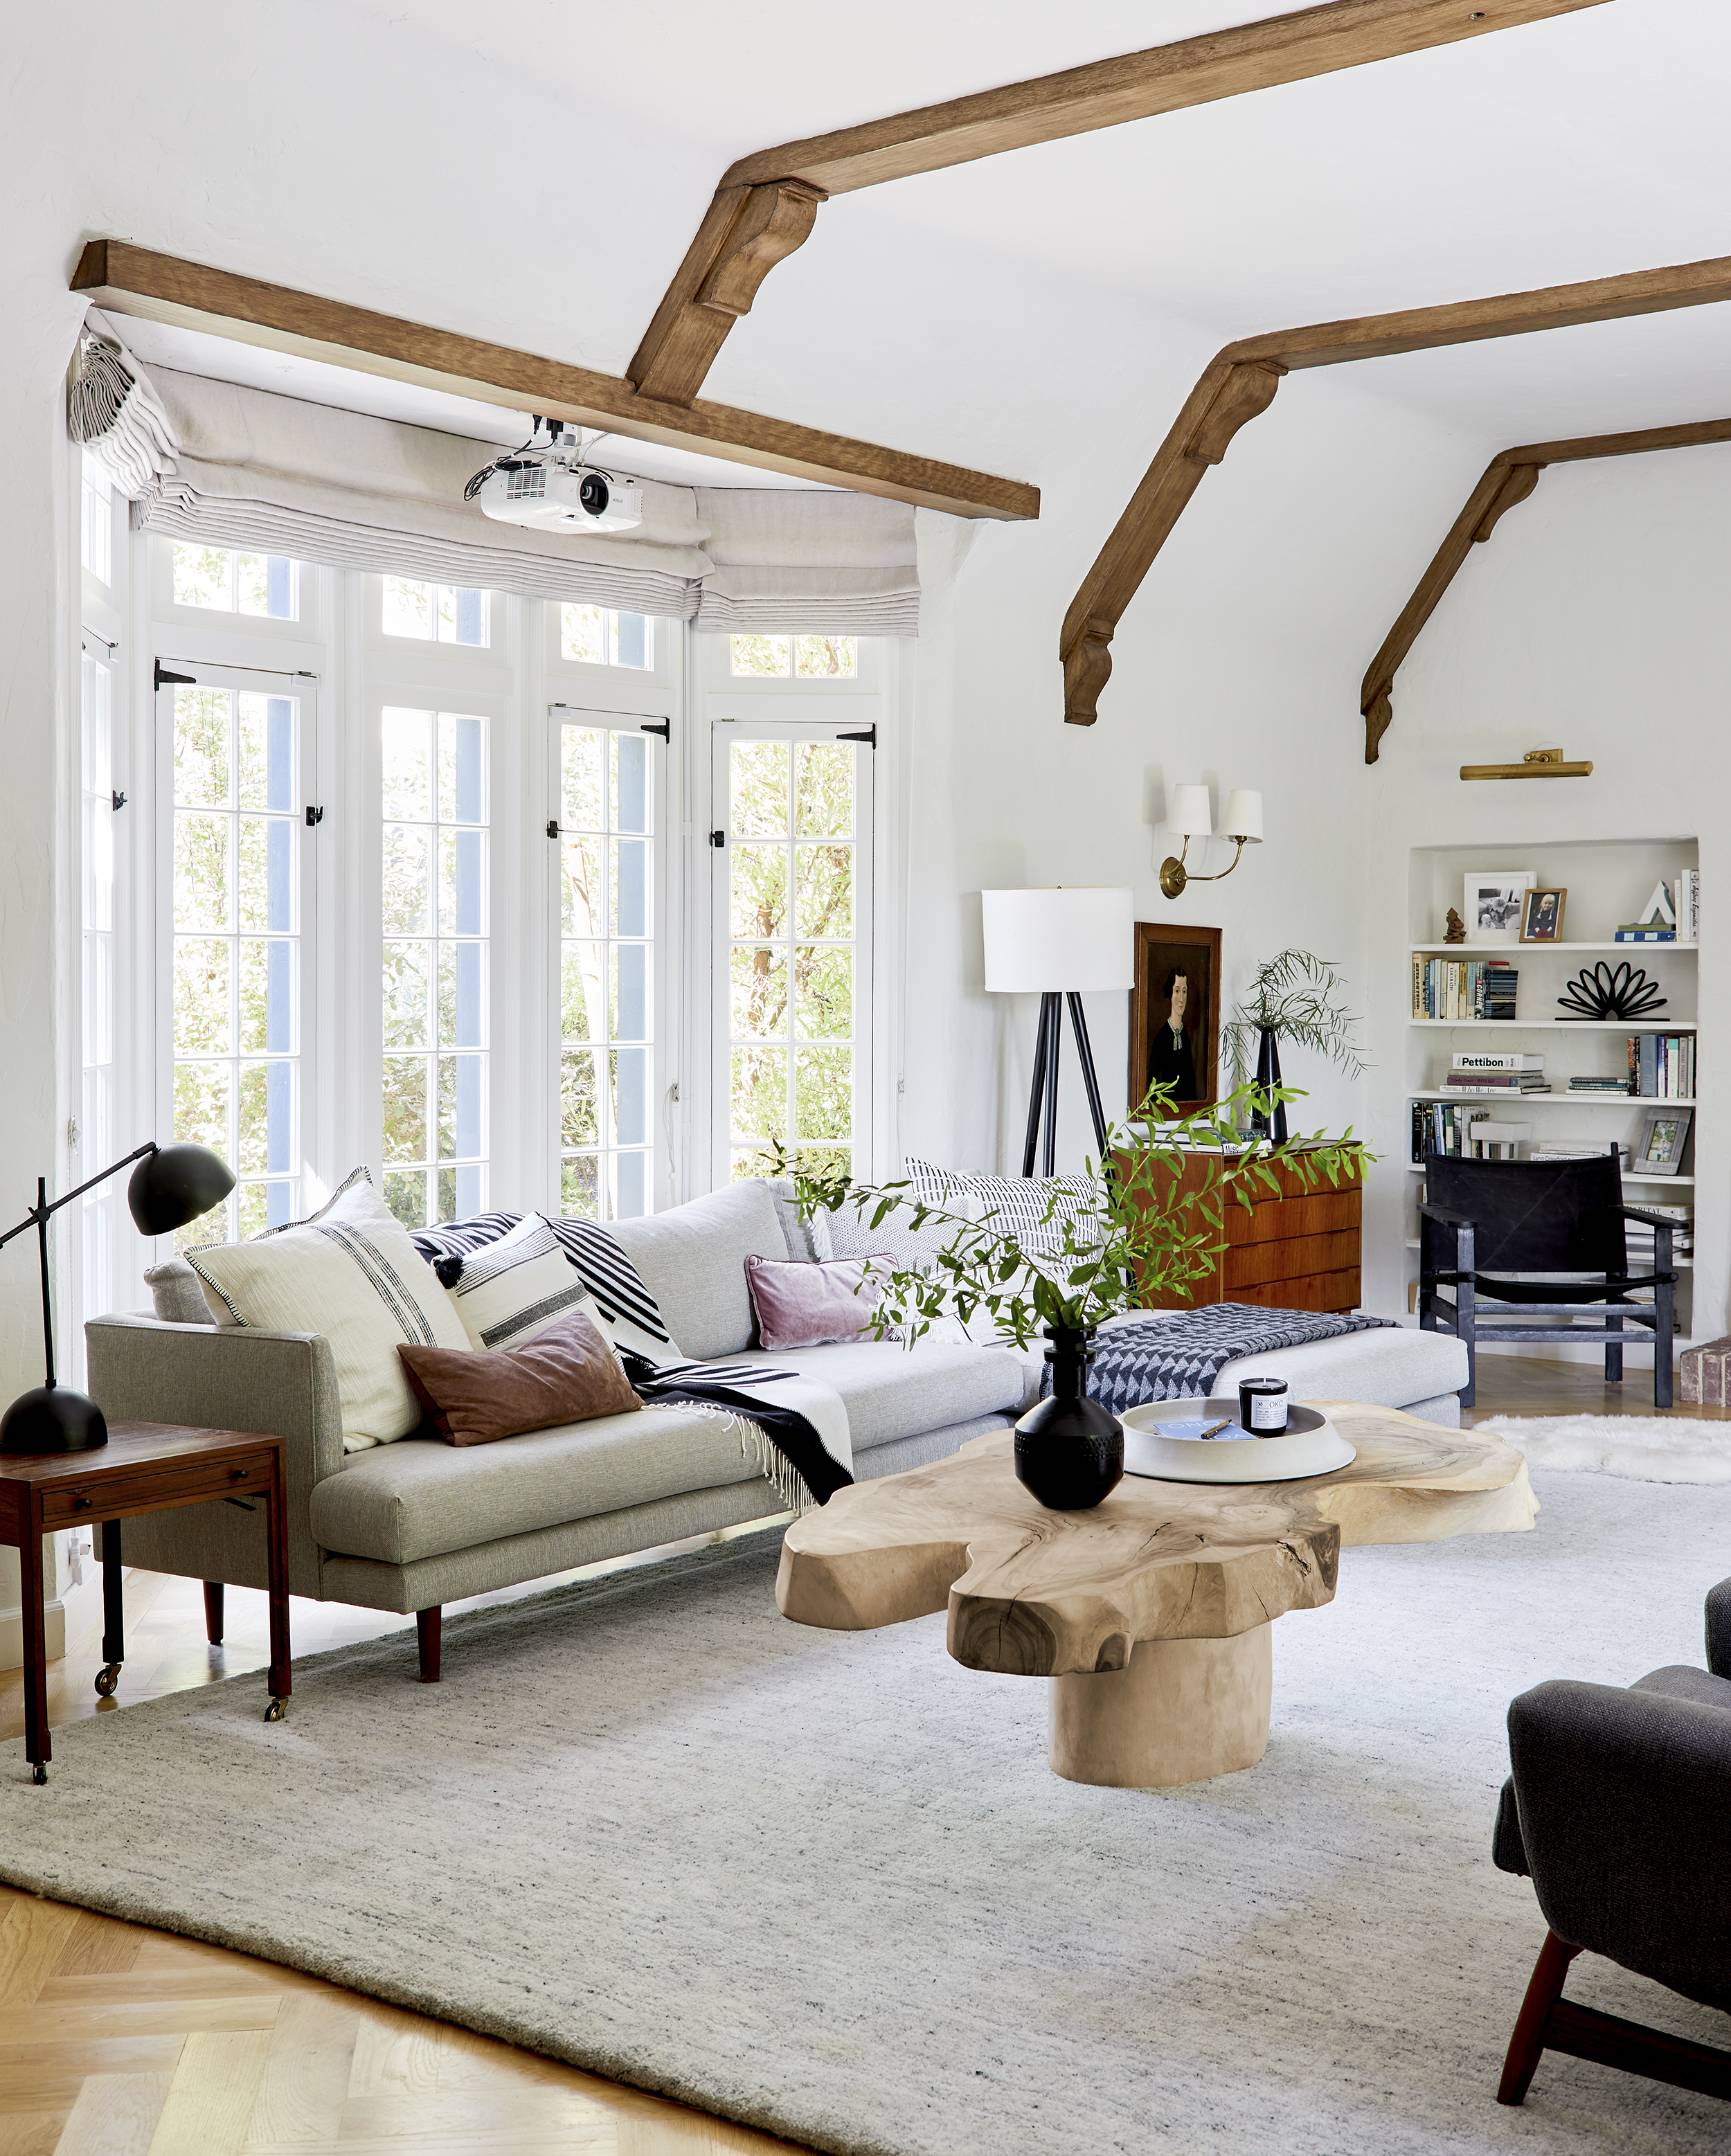 A modern living room with wooden beams and rustic decor